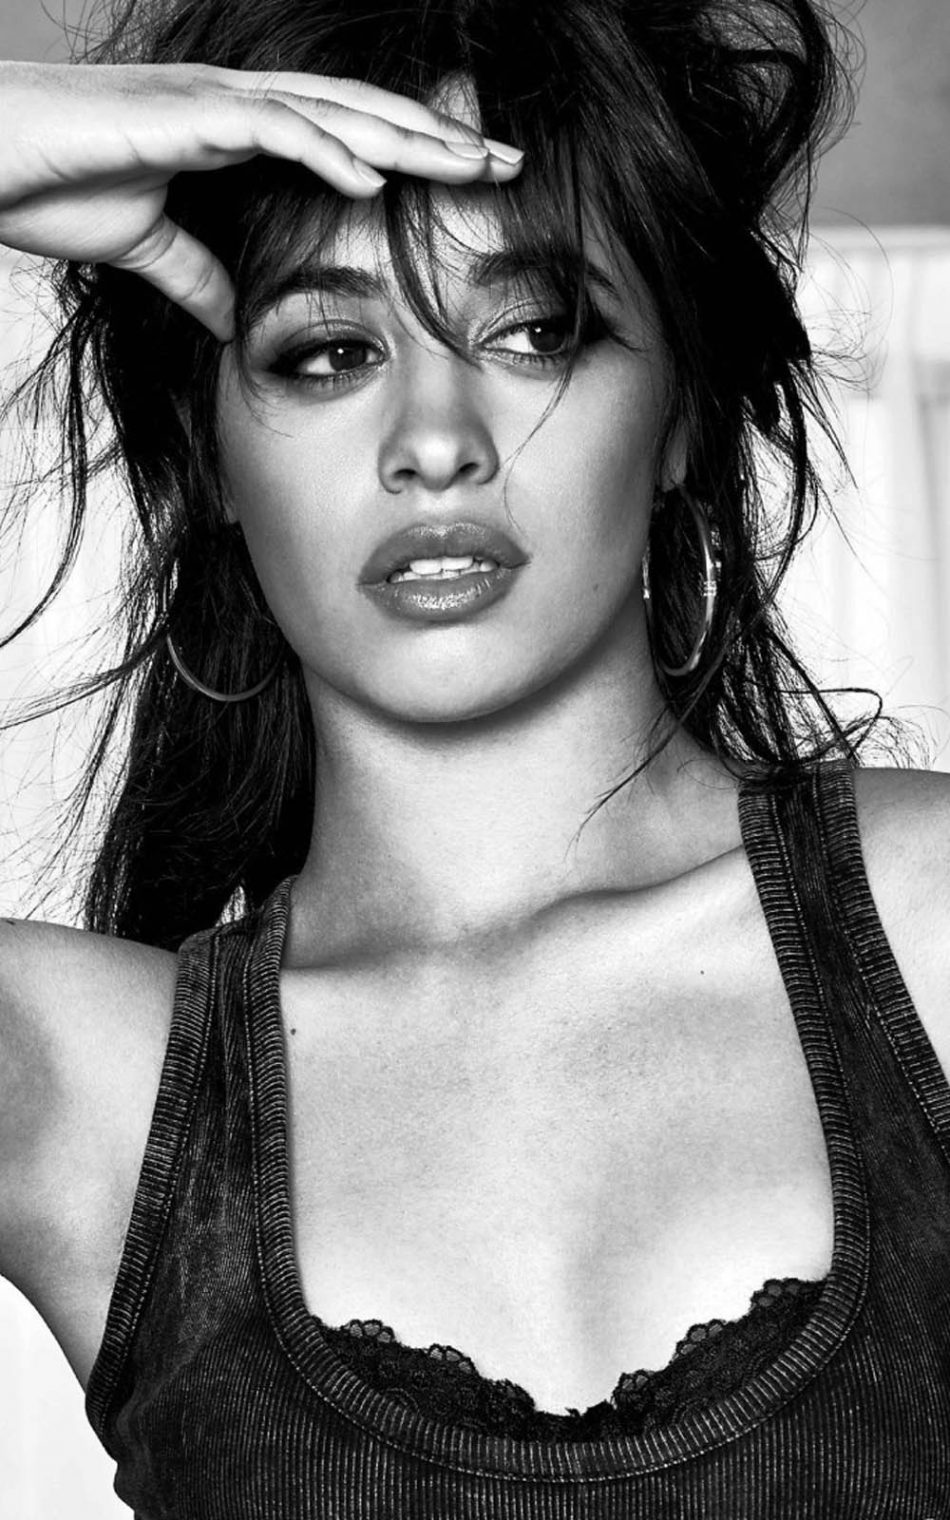 Camila Cabello Bw Hot Photoshoot Hd Mobile Wallpaper - Know No Better Model , HD Wallpaper & Backgrounds